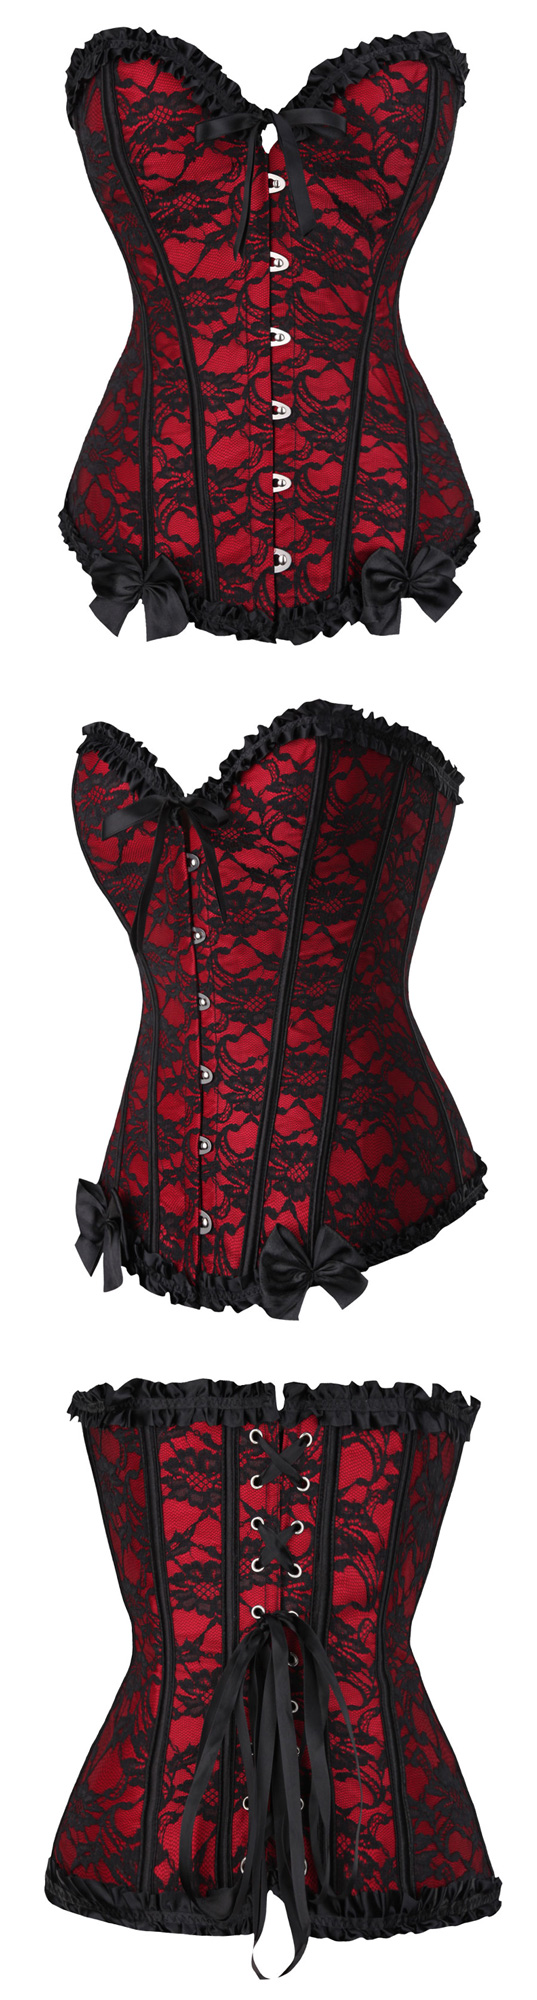 Lace Burlesque Corset Red